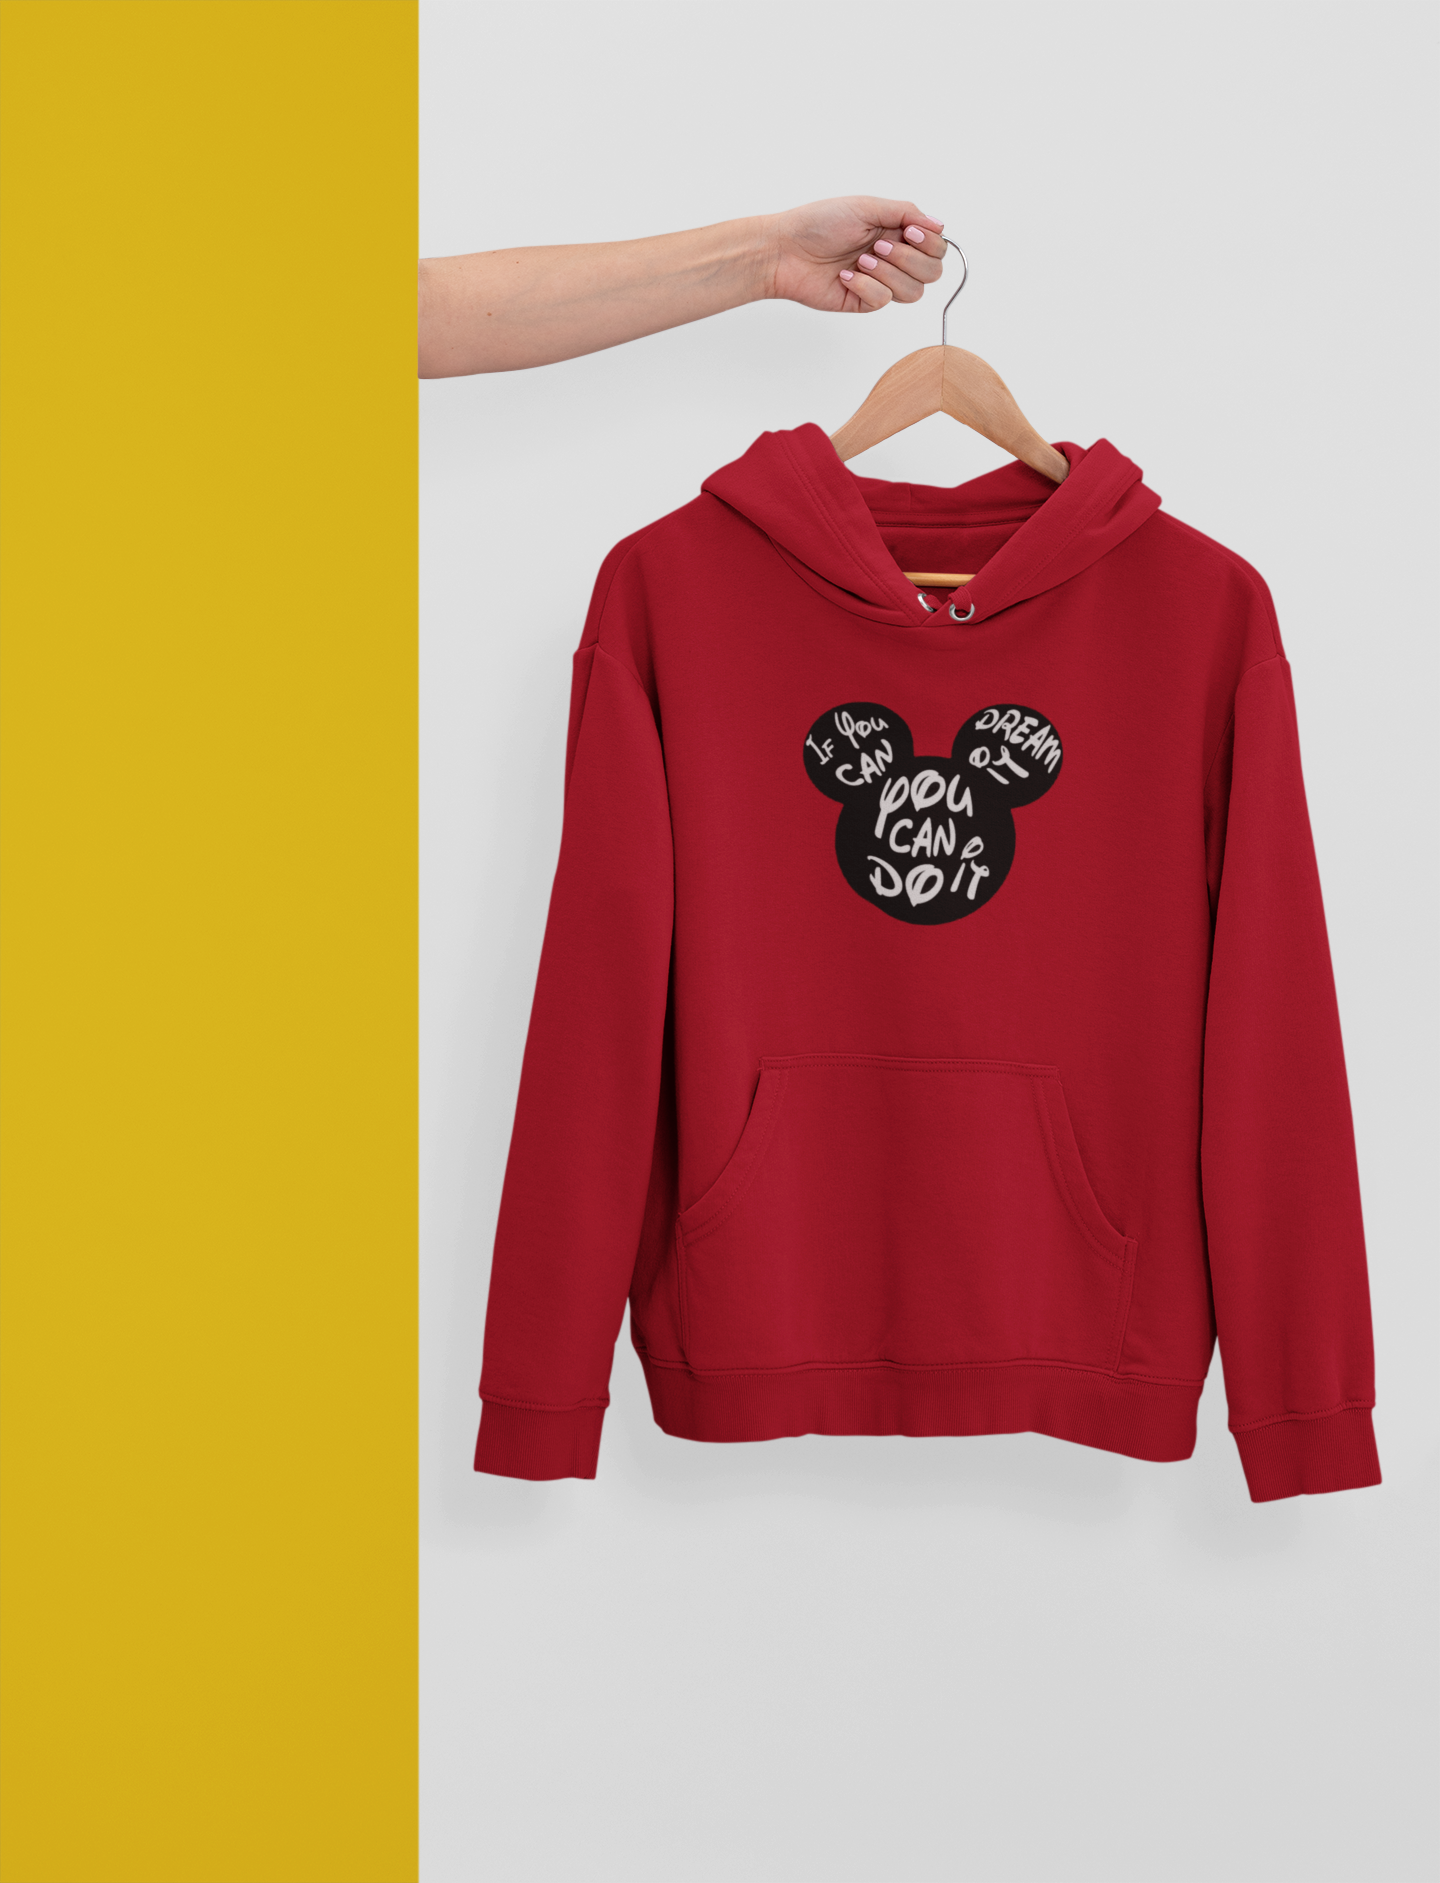 You can do it : Micky Mouse: - WINTER HOODIES